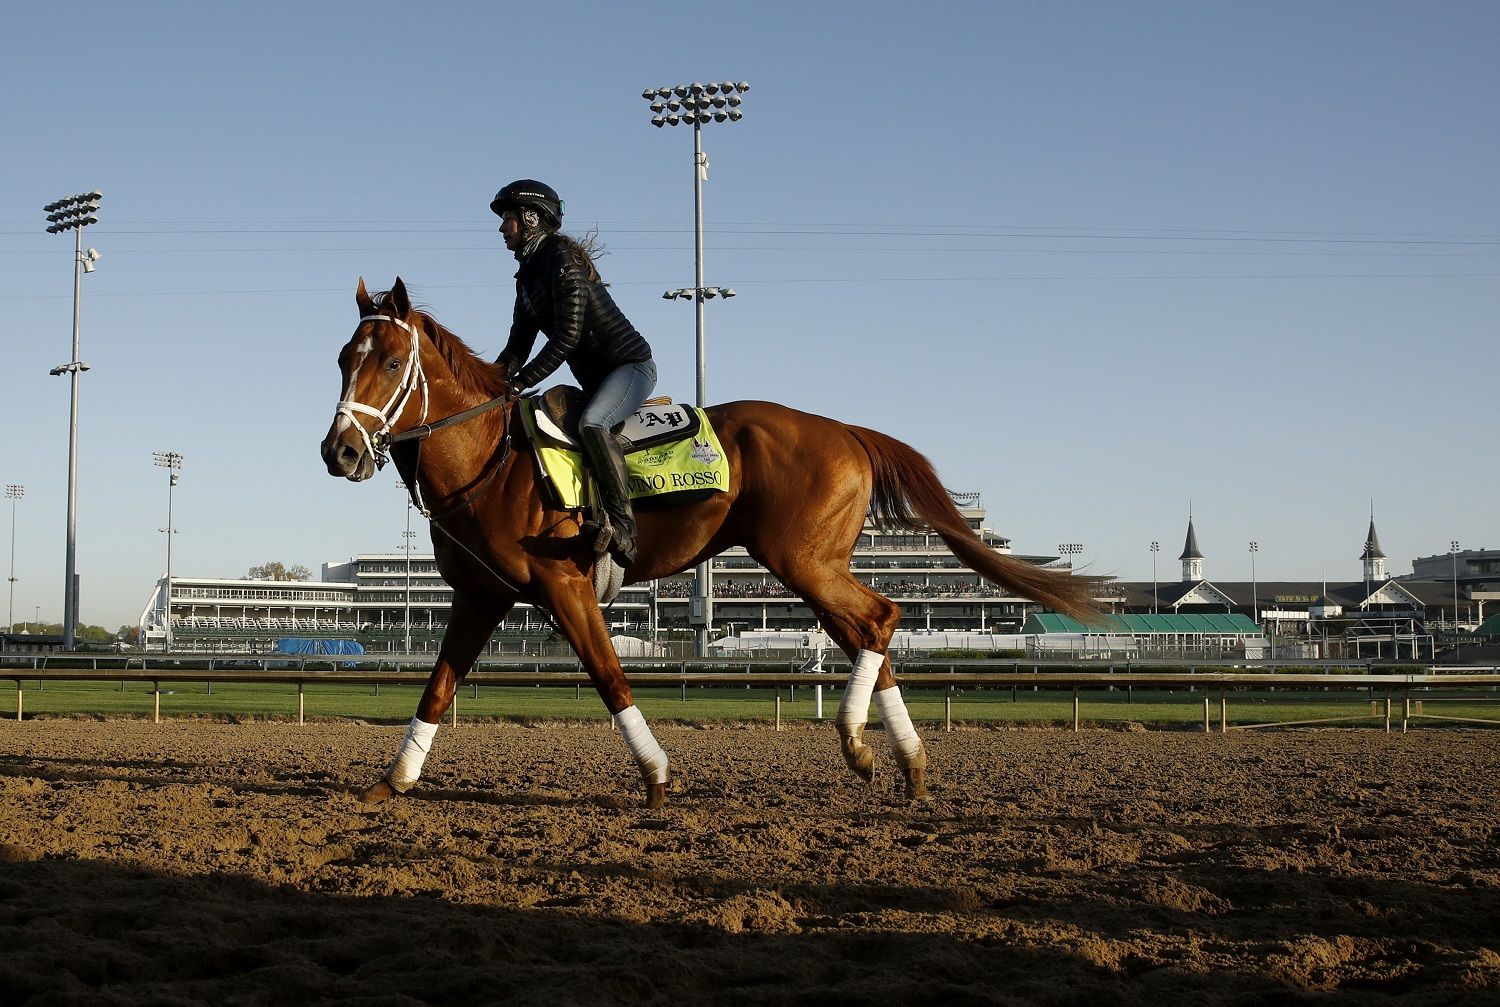 Kentucky Derby hopeful Vino Rosso runs during a morning workout at Churchill Downs Tuesday, May 1, 2018, in Louisville, Ky. The 144th running of the Kentucky Derby is scheduled for Saturday, May 5. (AP Photo/Charlie Riedel)